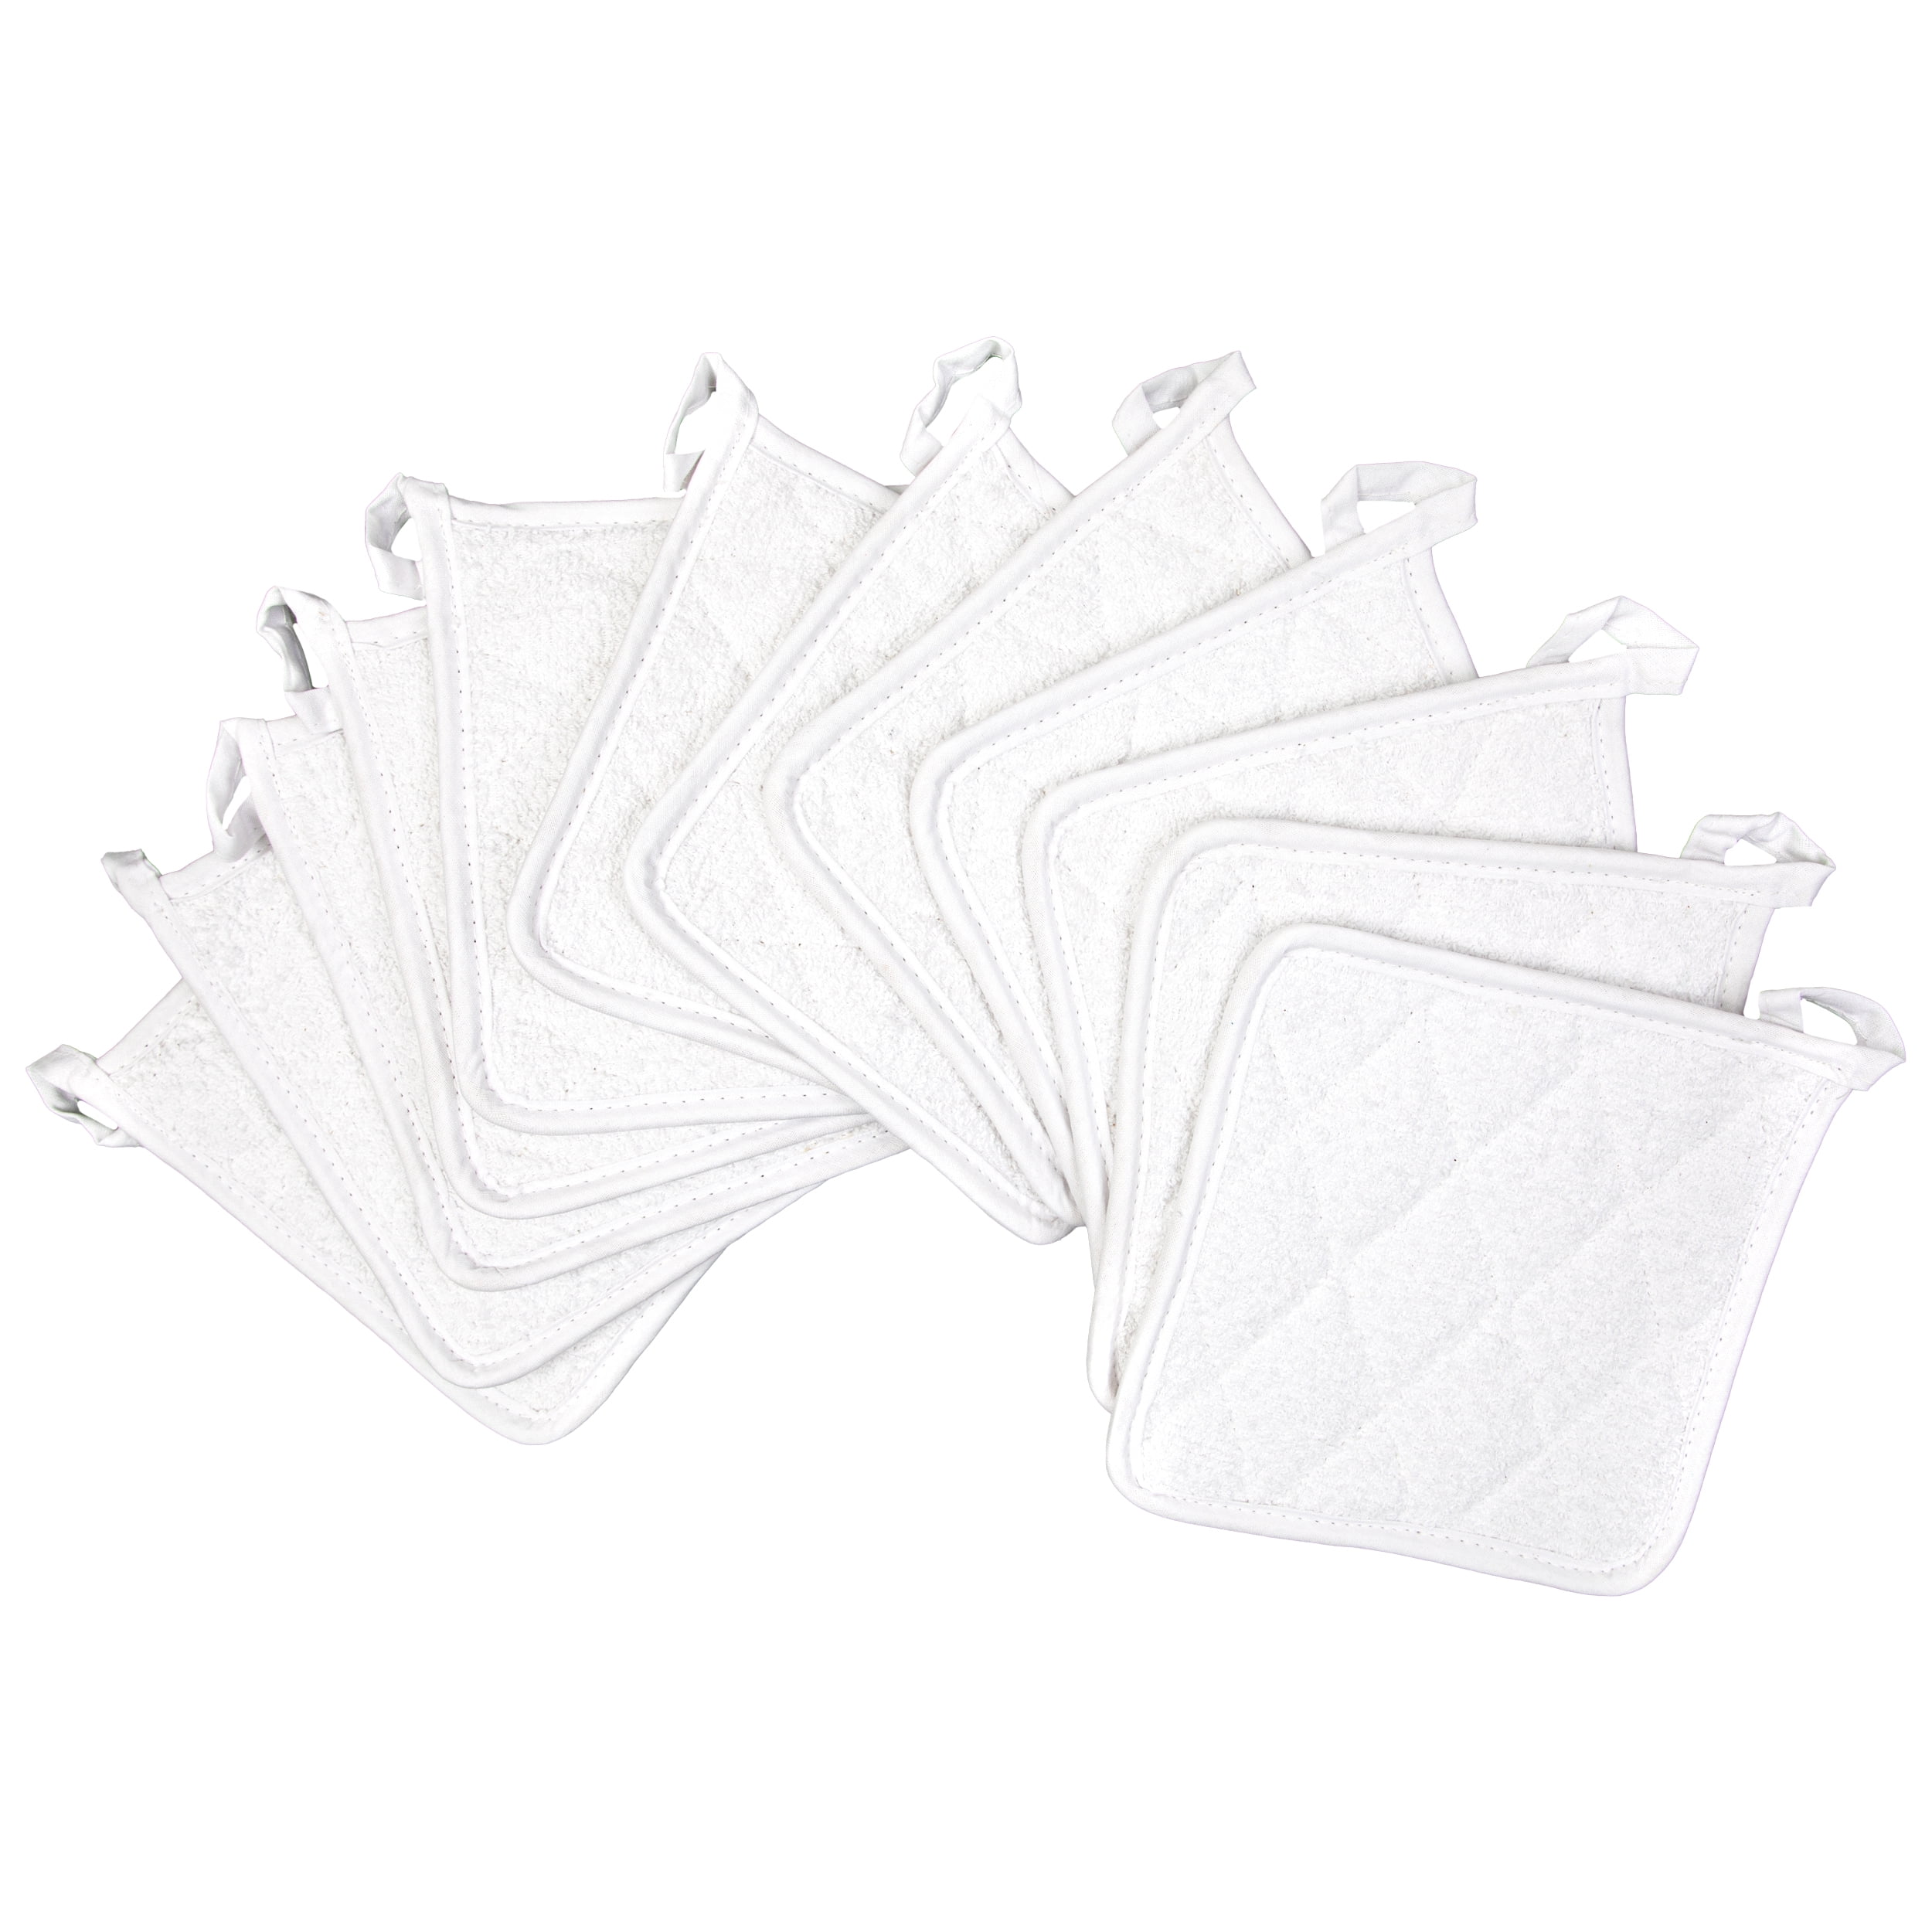 Classic Home 12 Pack Square Pot Holders 100% Cotton Heat Resistant Hotpads  for Cooking Kitchen